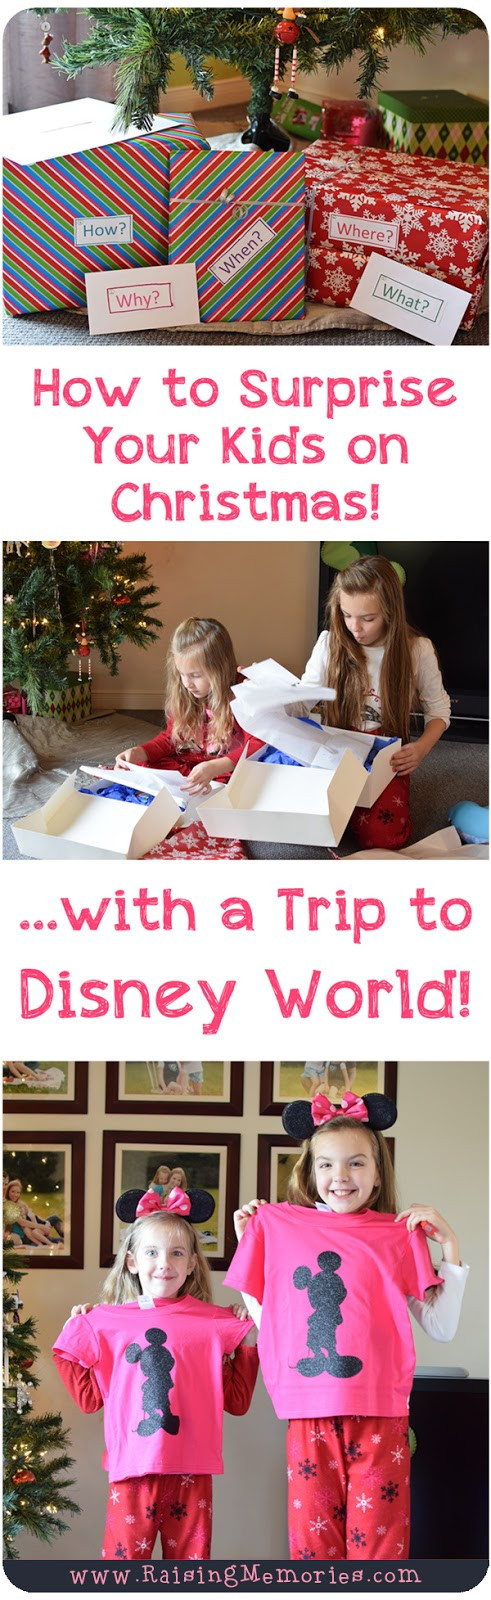 Gifts For Kids Going To Disney
 How to Surprise Your Kids on Christmas with a Trip to